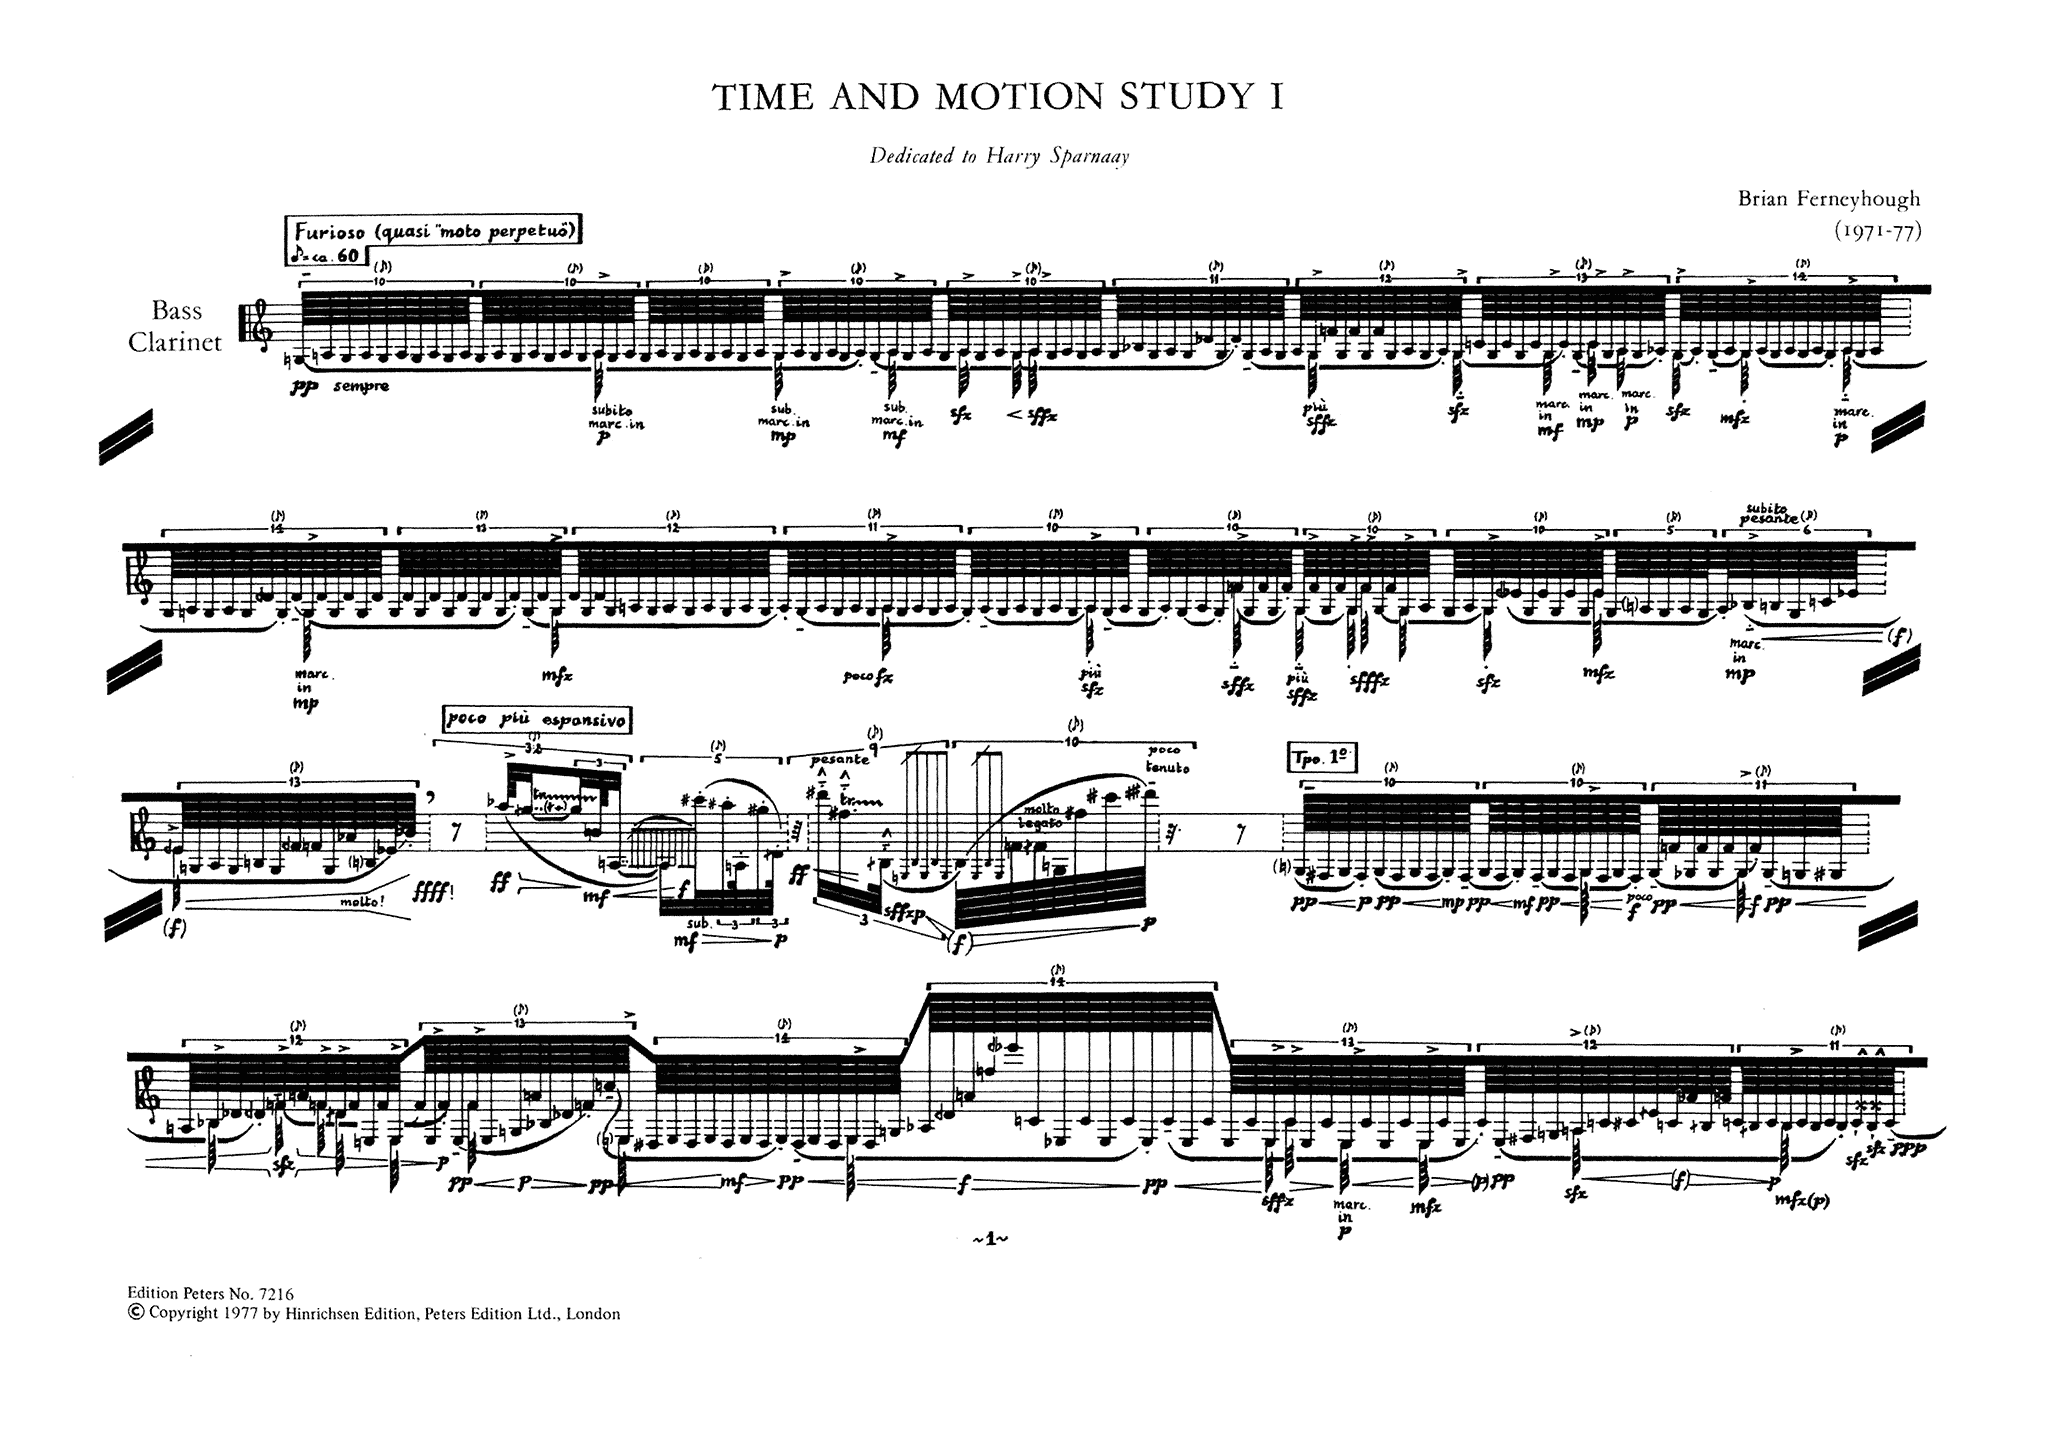 Ferneyhough Time and Motion Study I Blass Clarinet Page 1